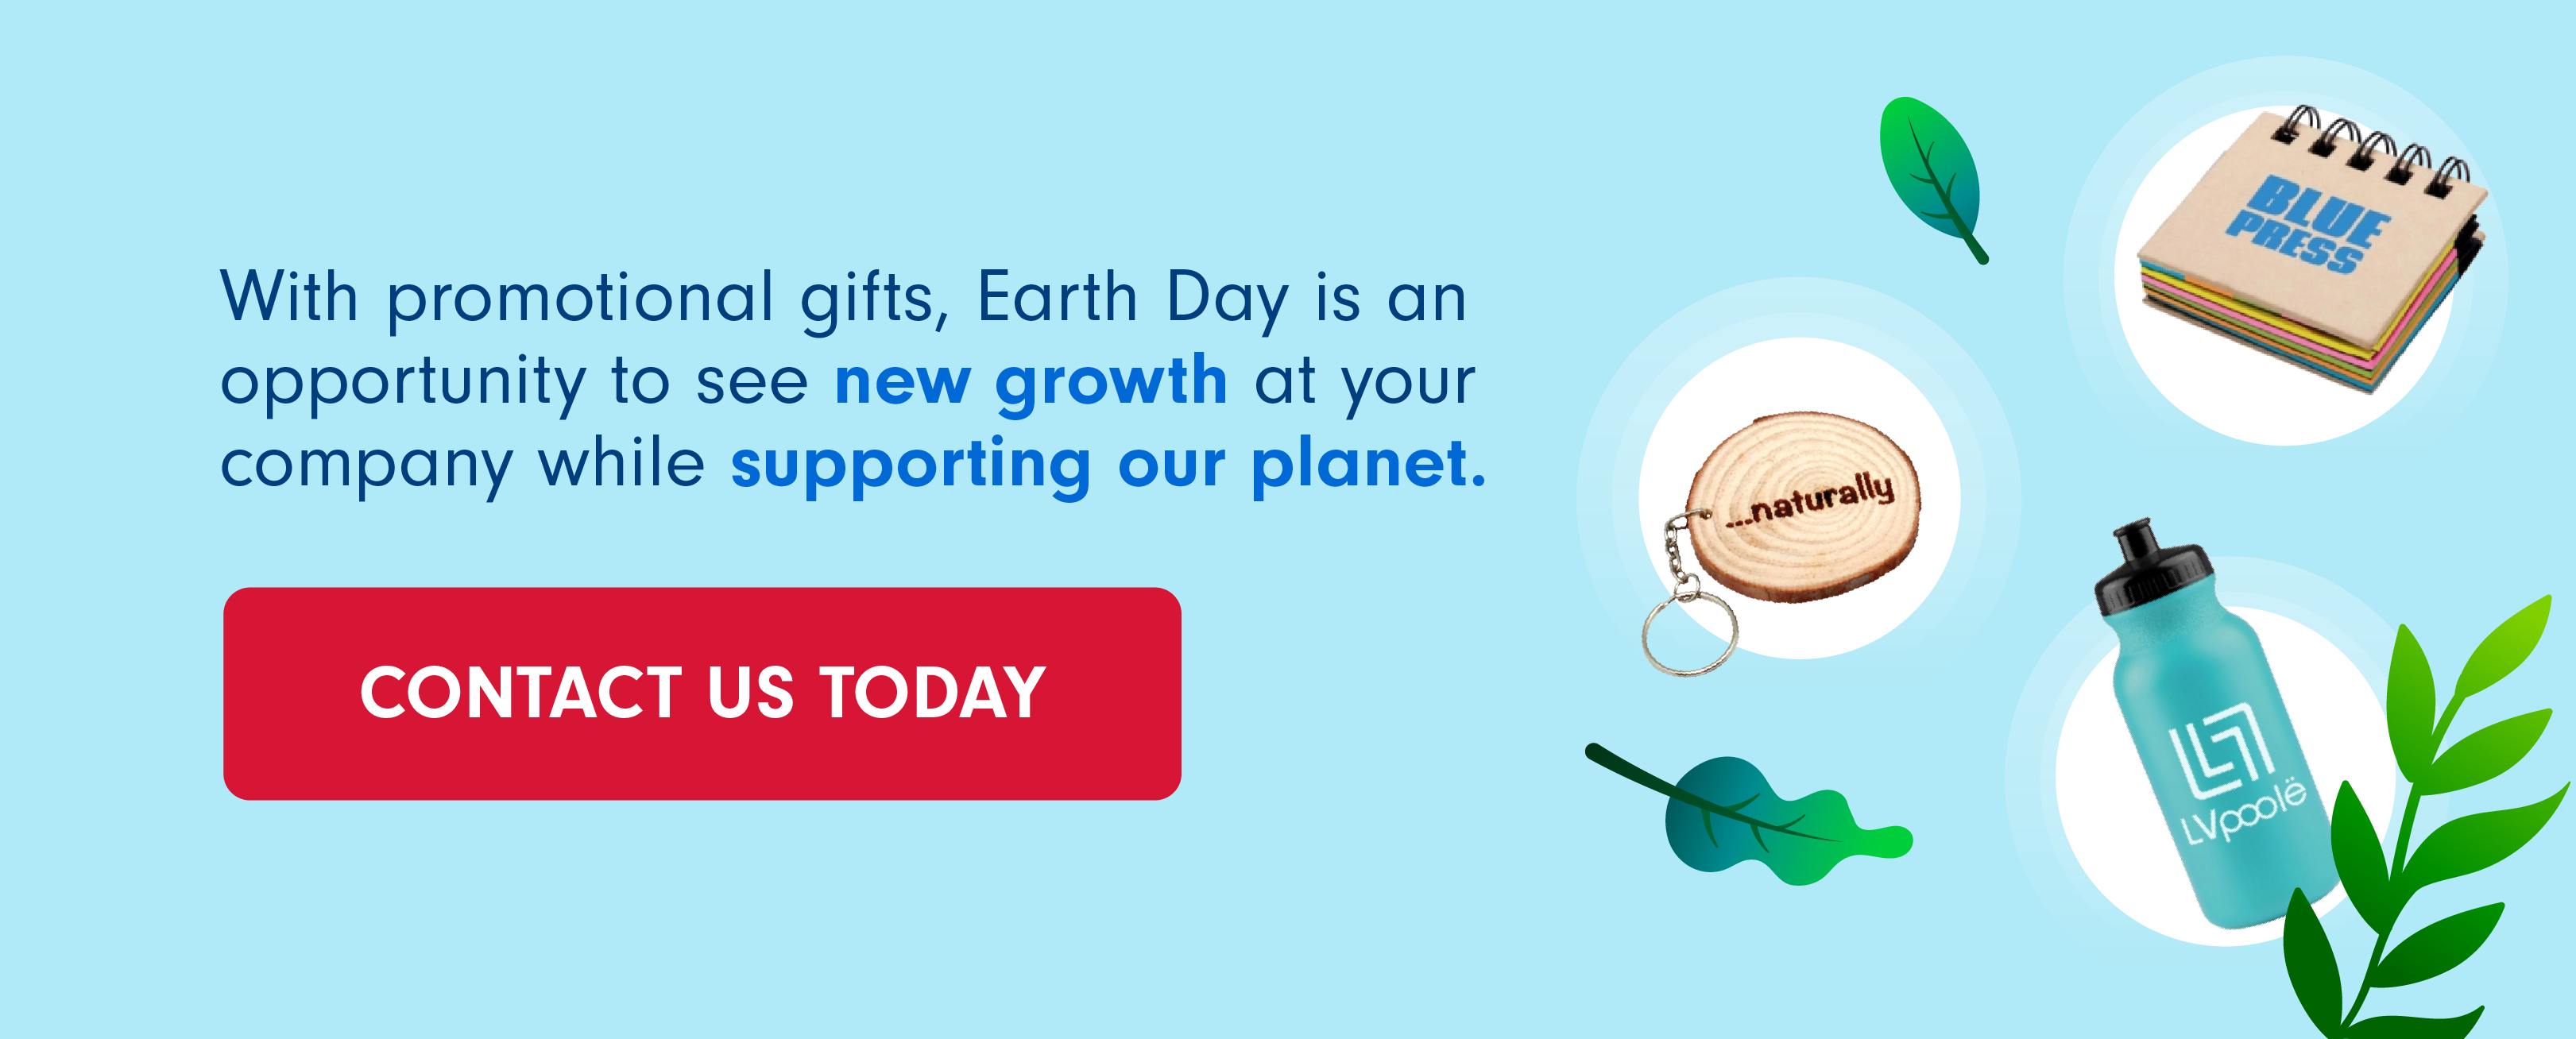 earth day promo gifts